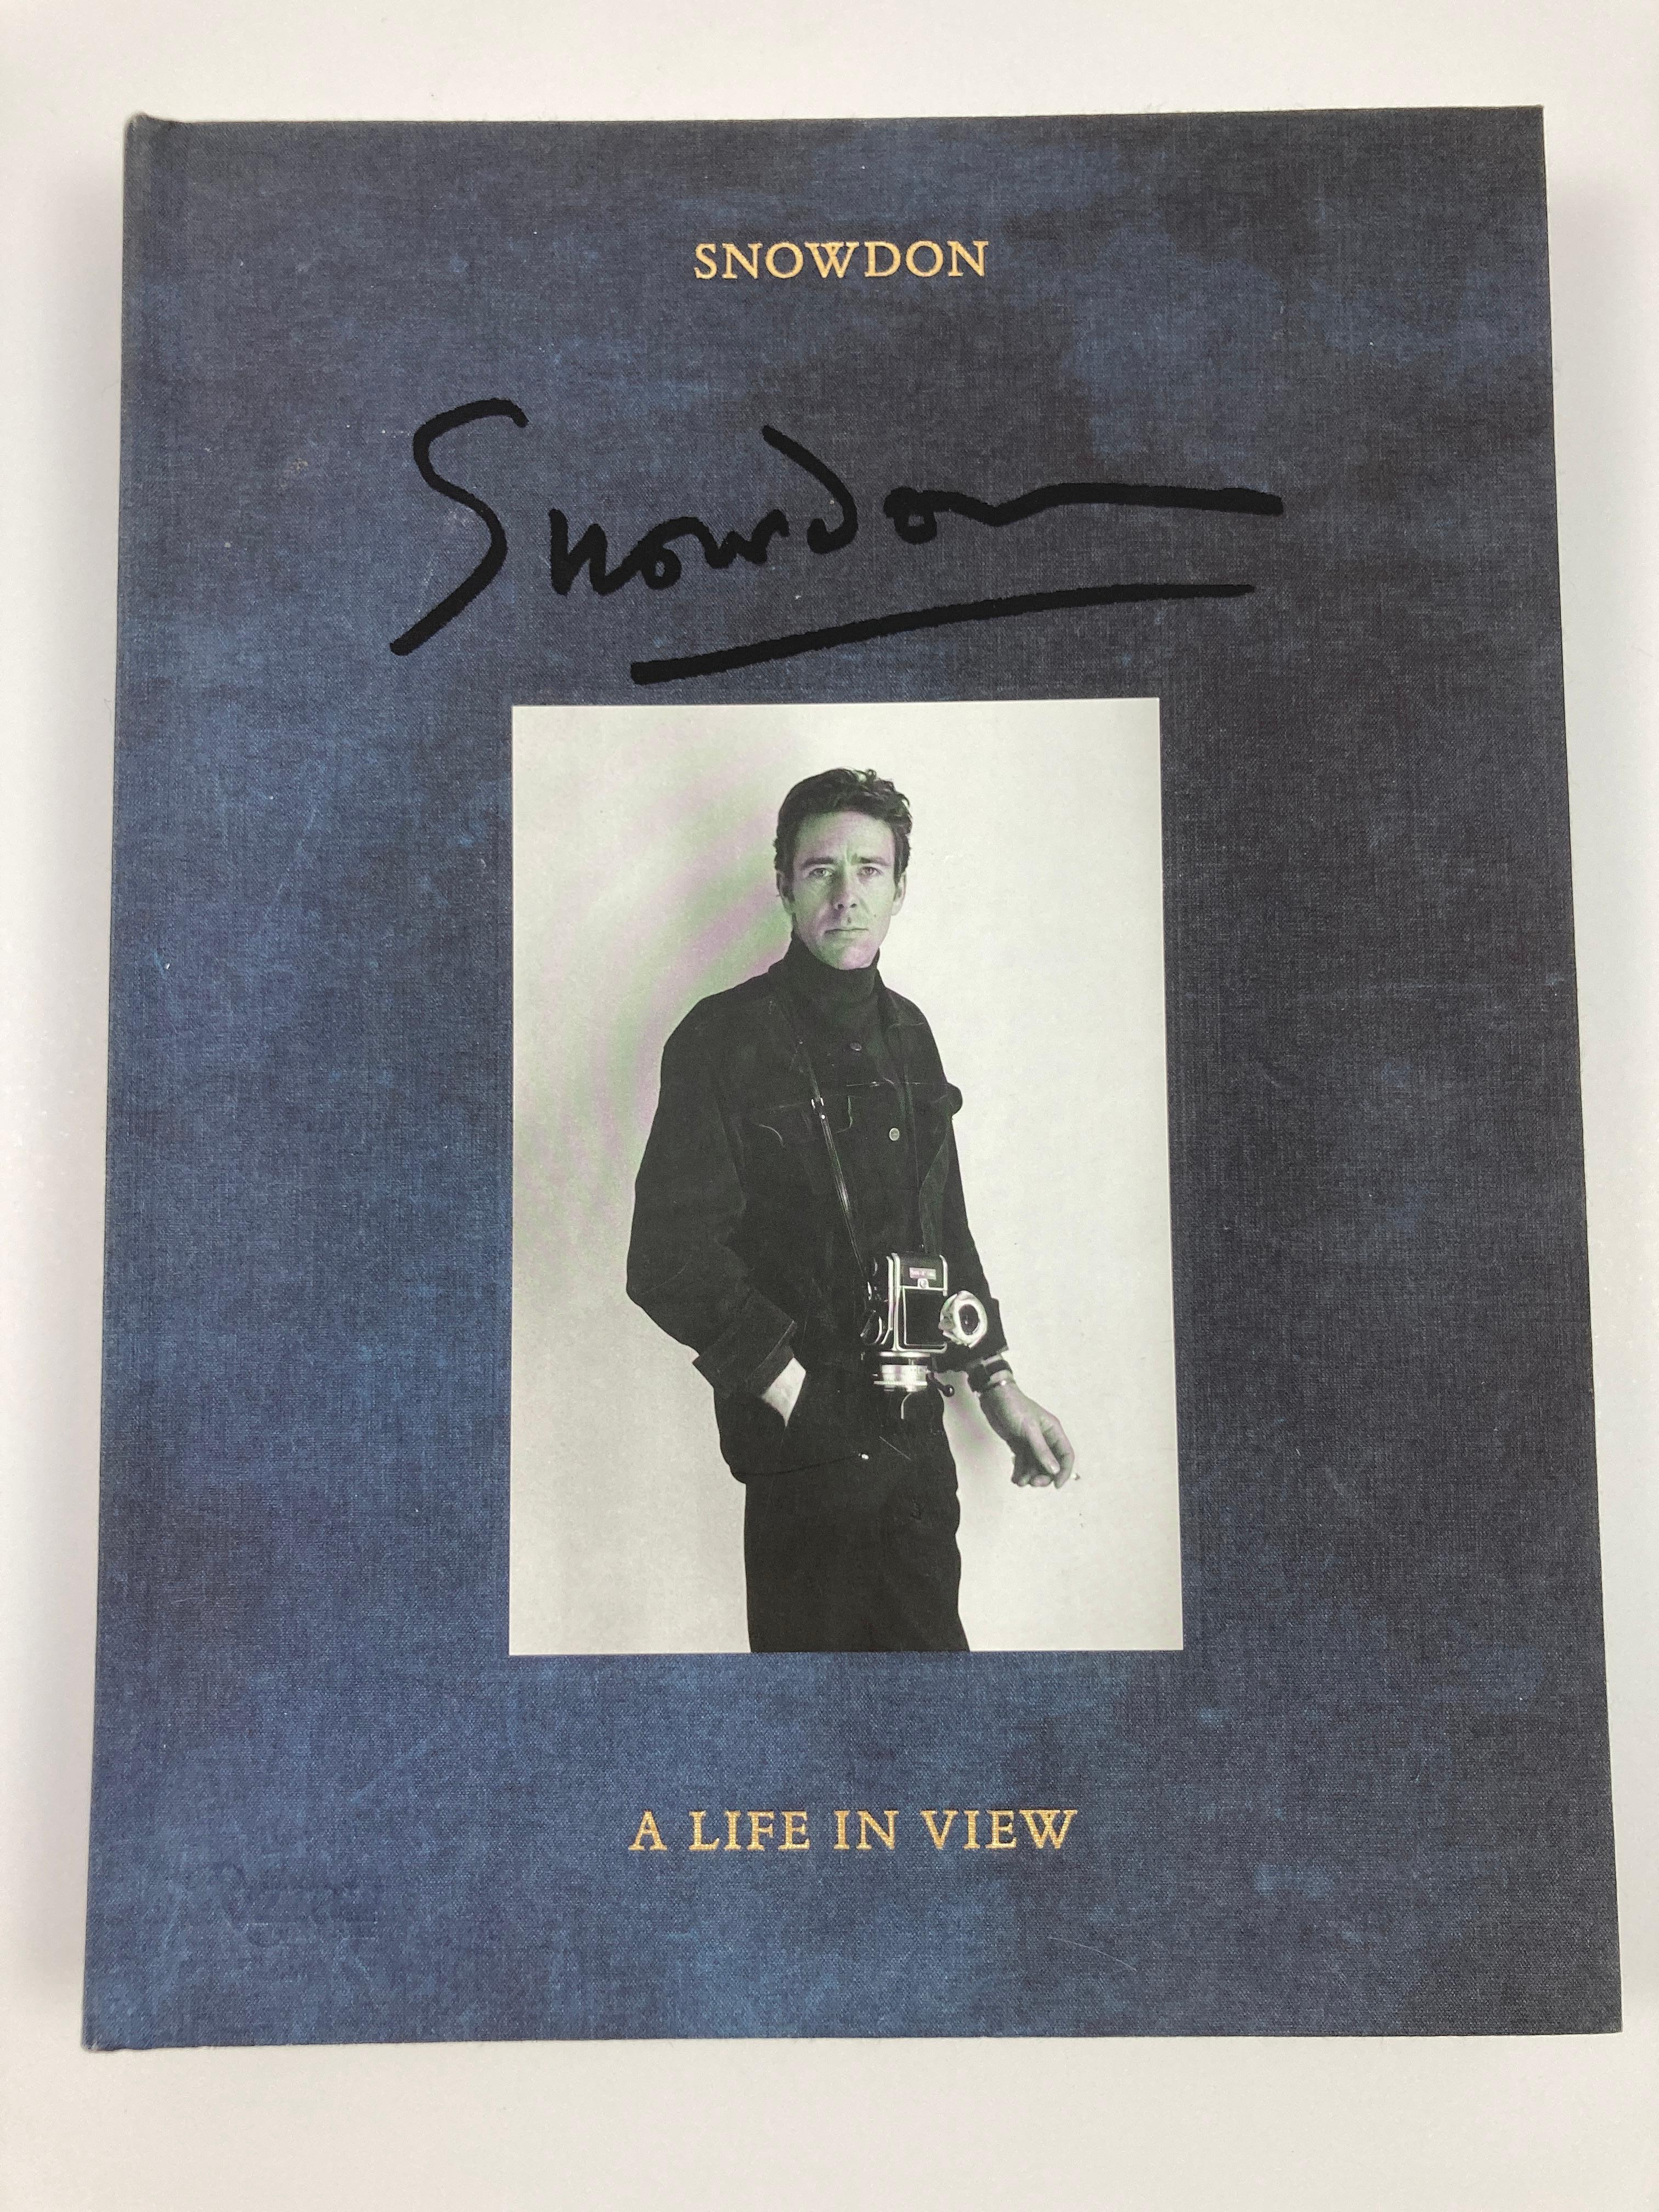 Snowdon: A Life in View Hardcover – Illustrated, September-23-2014. by Antony Armstrong Jones (Author), Frances Von Hofmannsthal (Editor), Patrick Kinmonth (Introduction), Graydon Carter (Foreword), Tom Ford (Contributor).
This is a wonderful